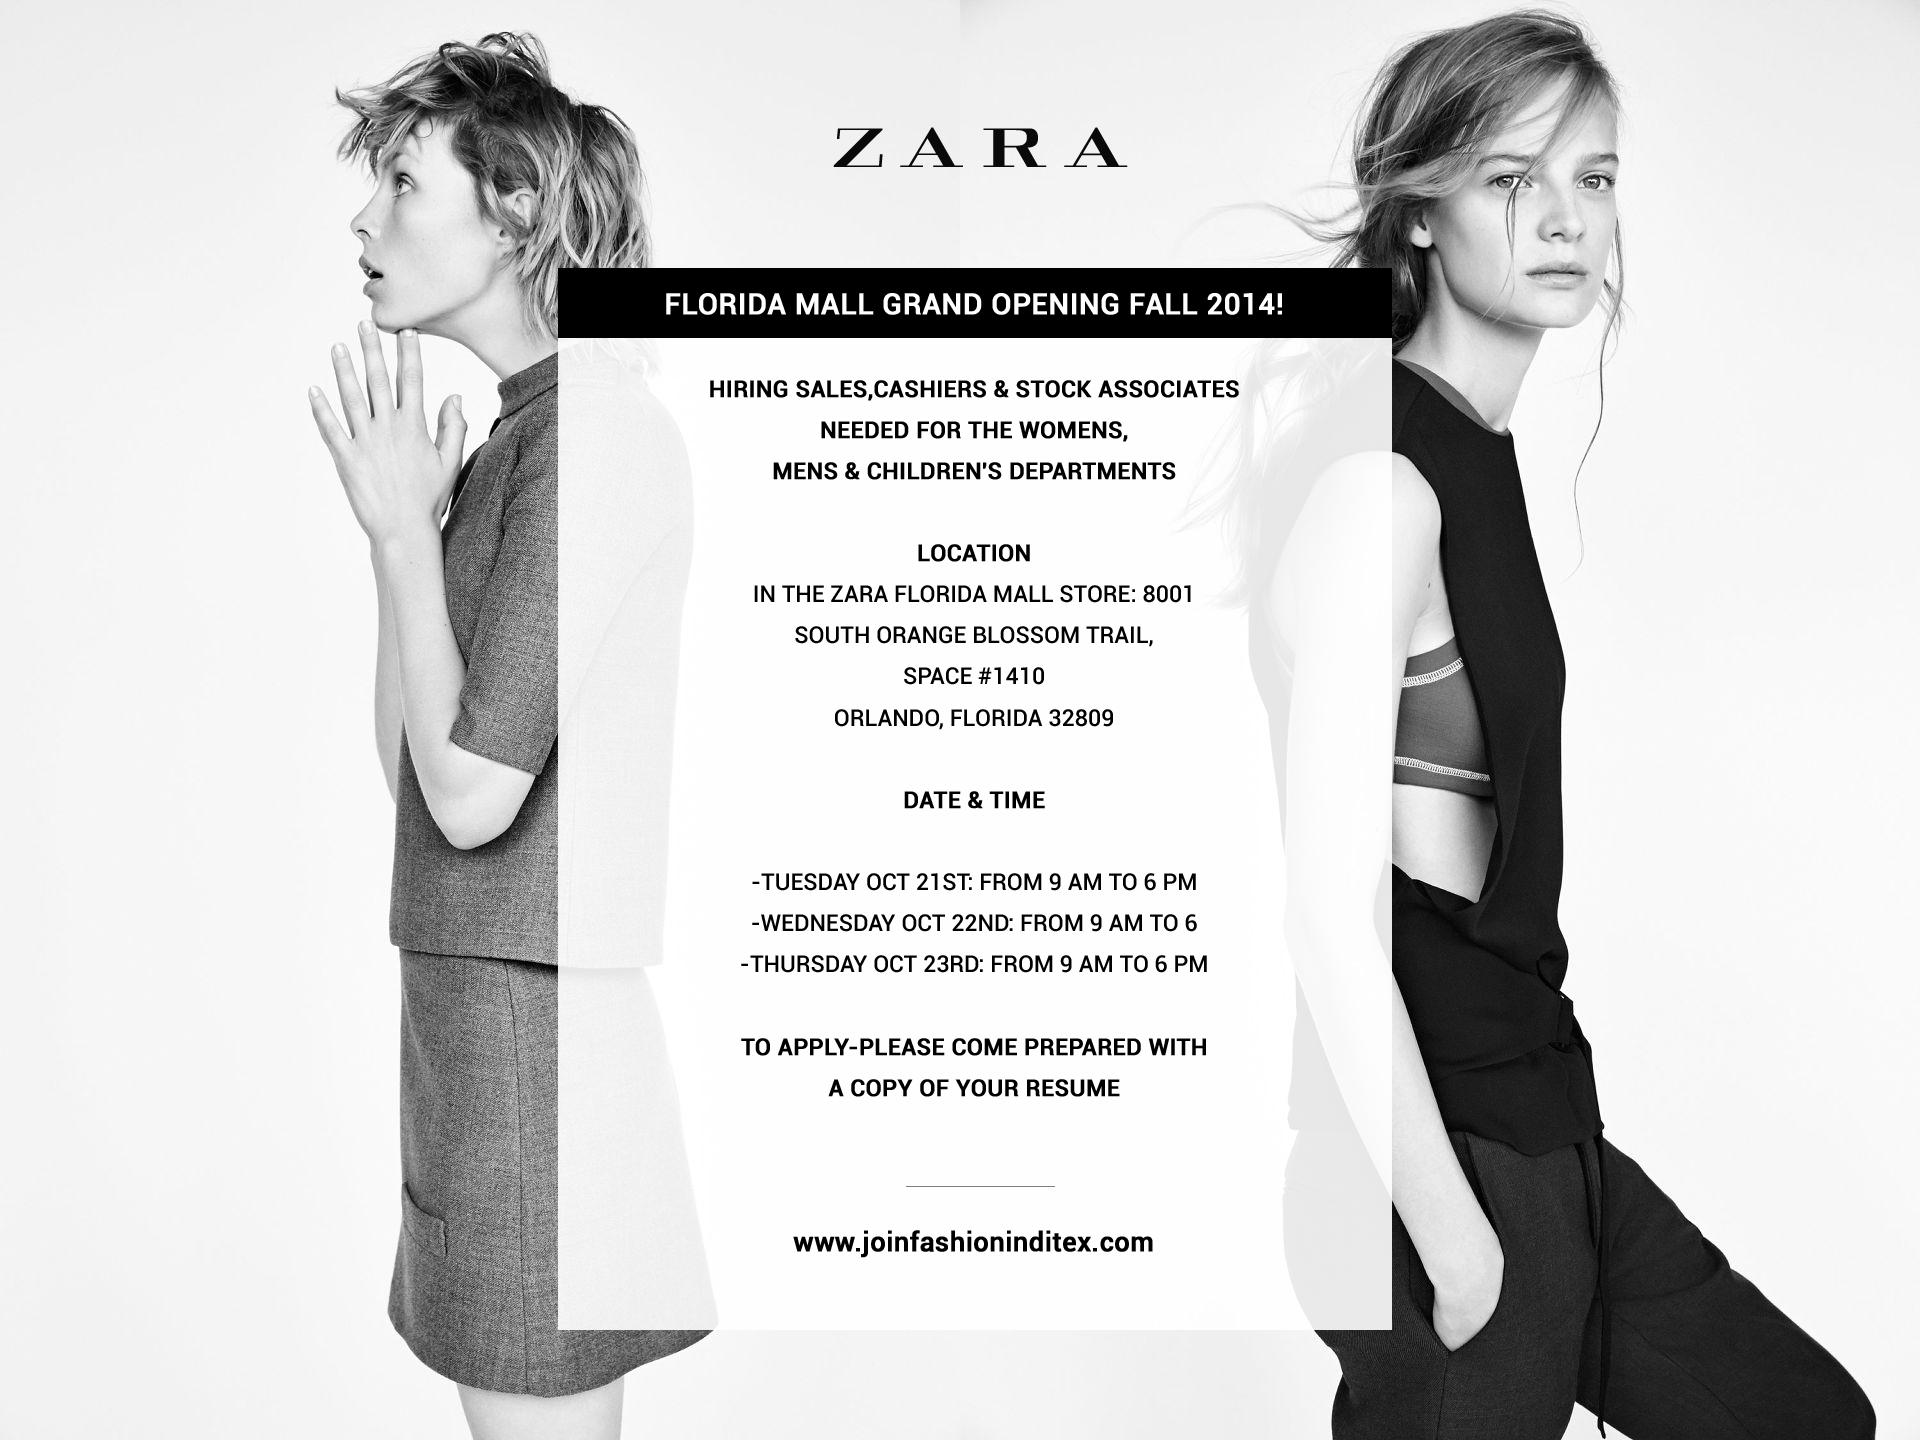 Inditex Careers on Twitter: "#Zara invites you to a #hiring open house for  our #Florida mall store (#Orlando)! #JoinFashion #USA #jobs  http://t.co/XJGQFKre5k" / Twitter